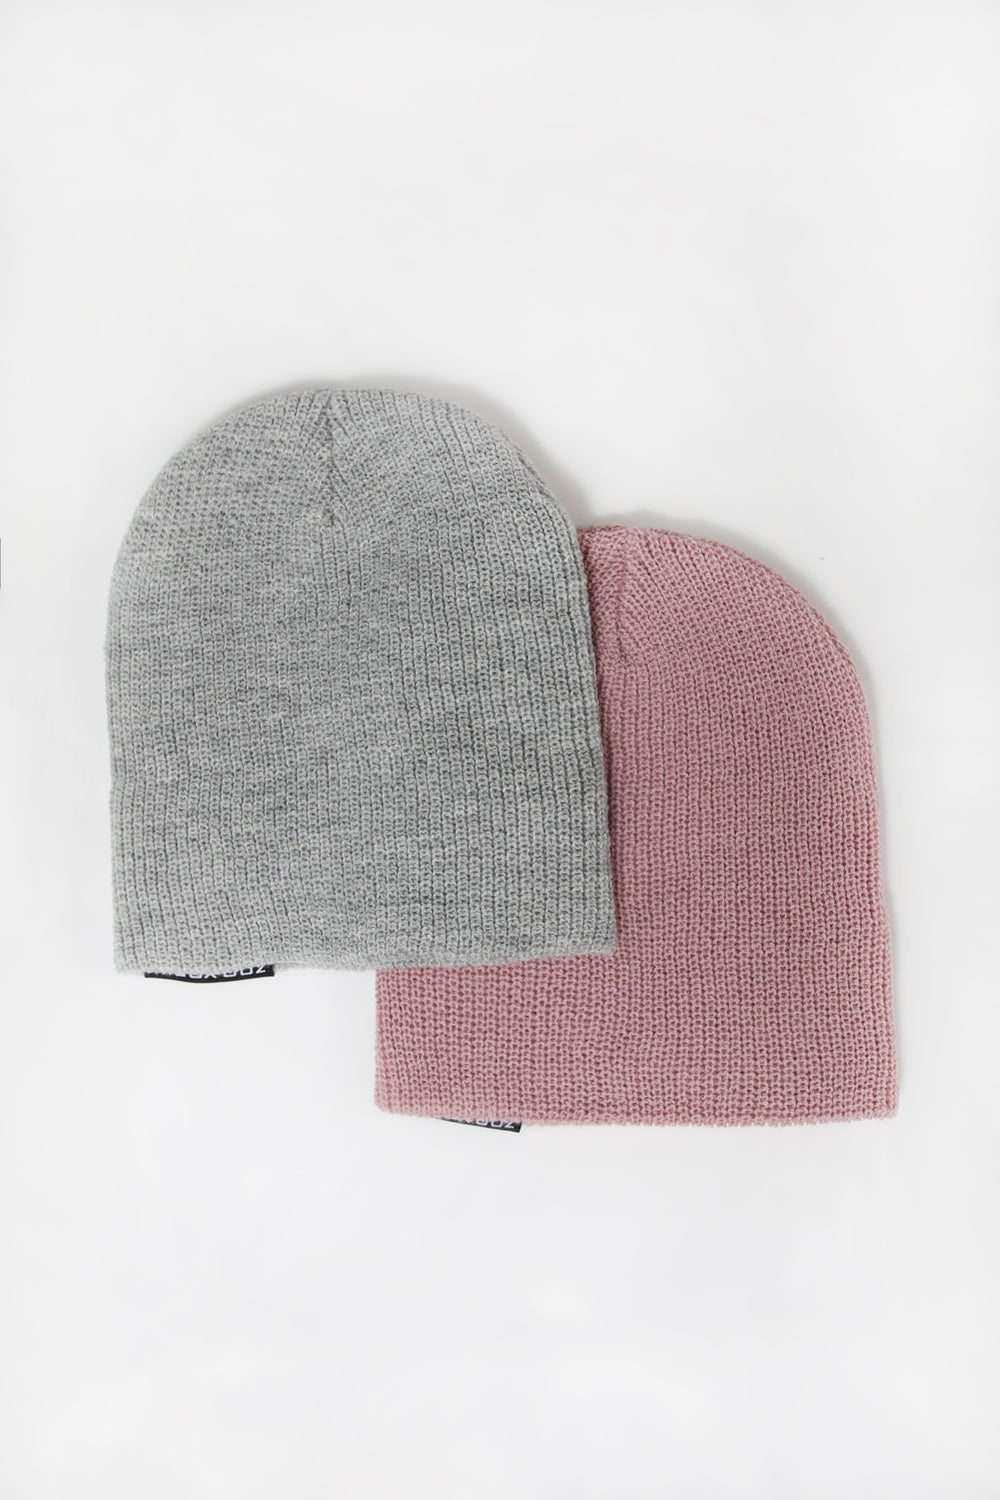 Zoo York Mens Slouch Beanie 2-Pack Pink